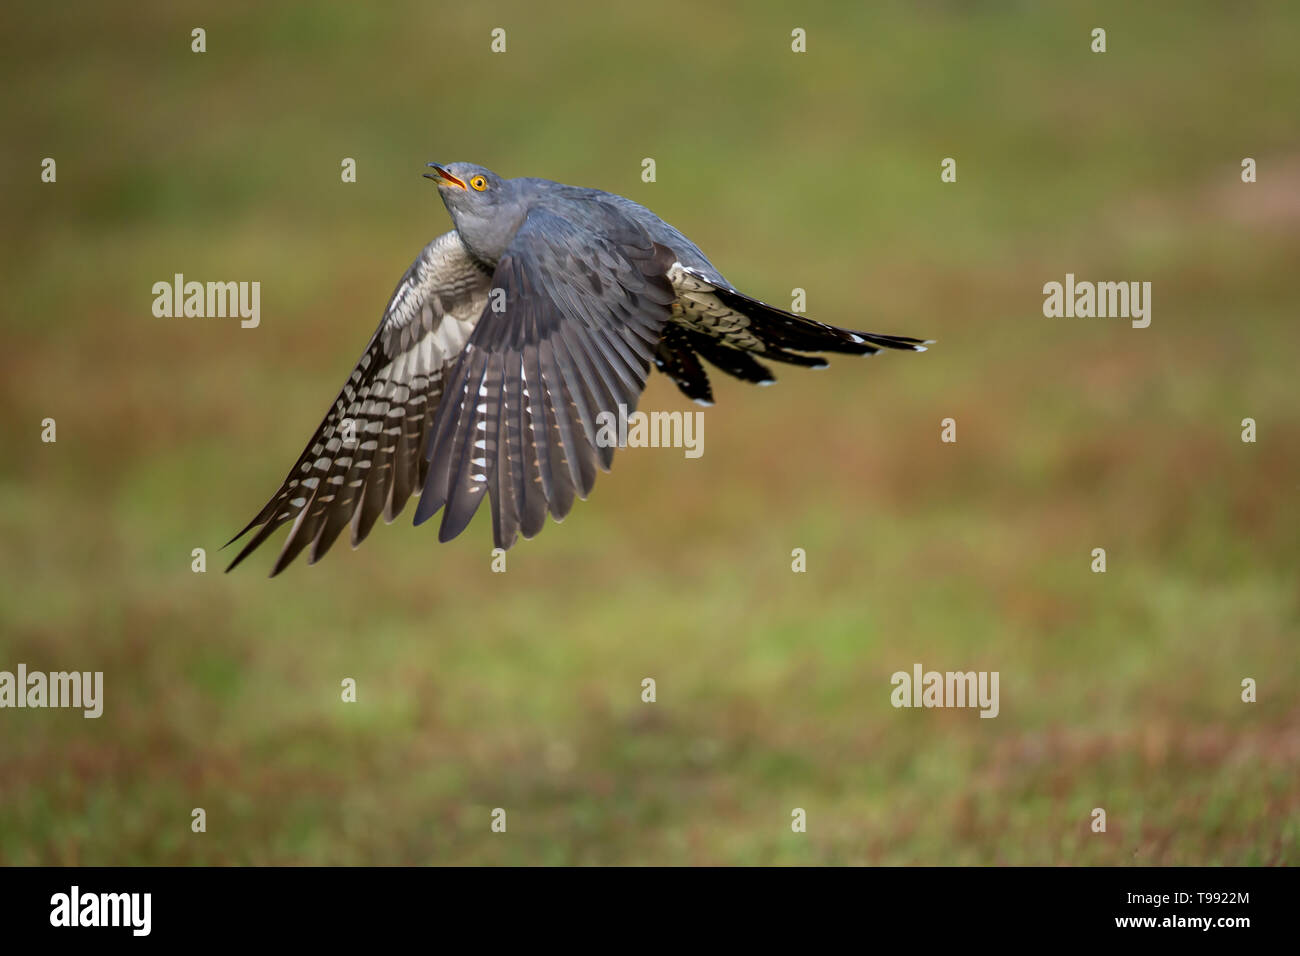 A Common cuckoo in flight up close Stock Photo